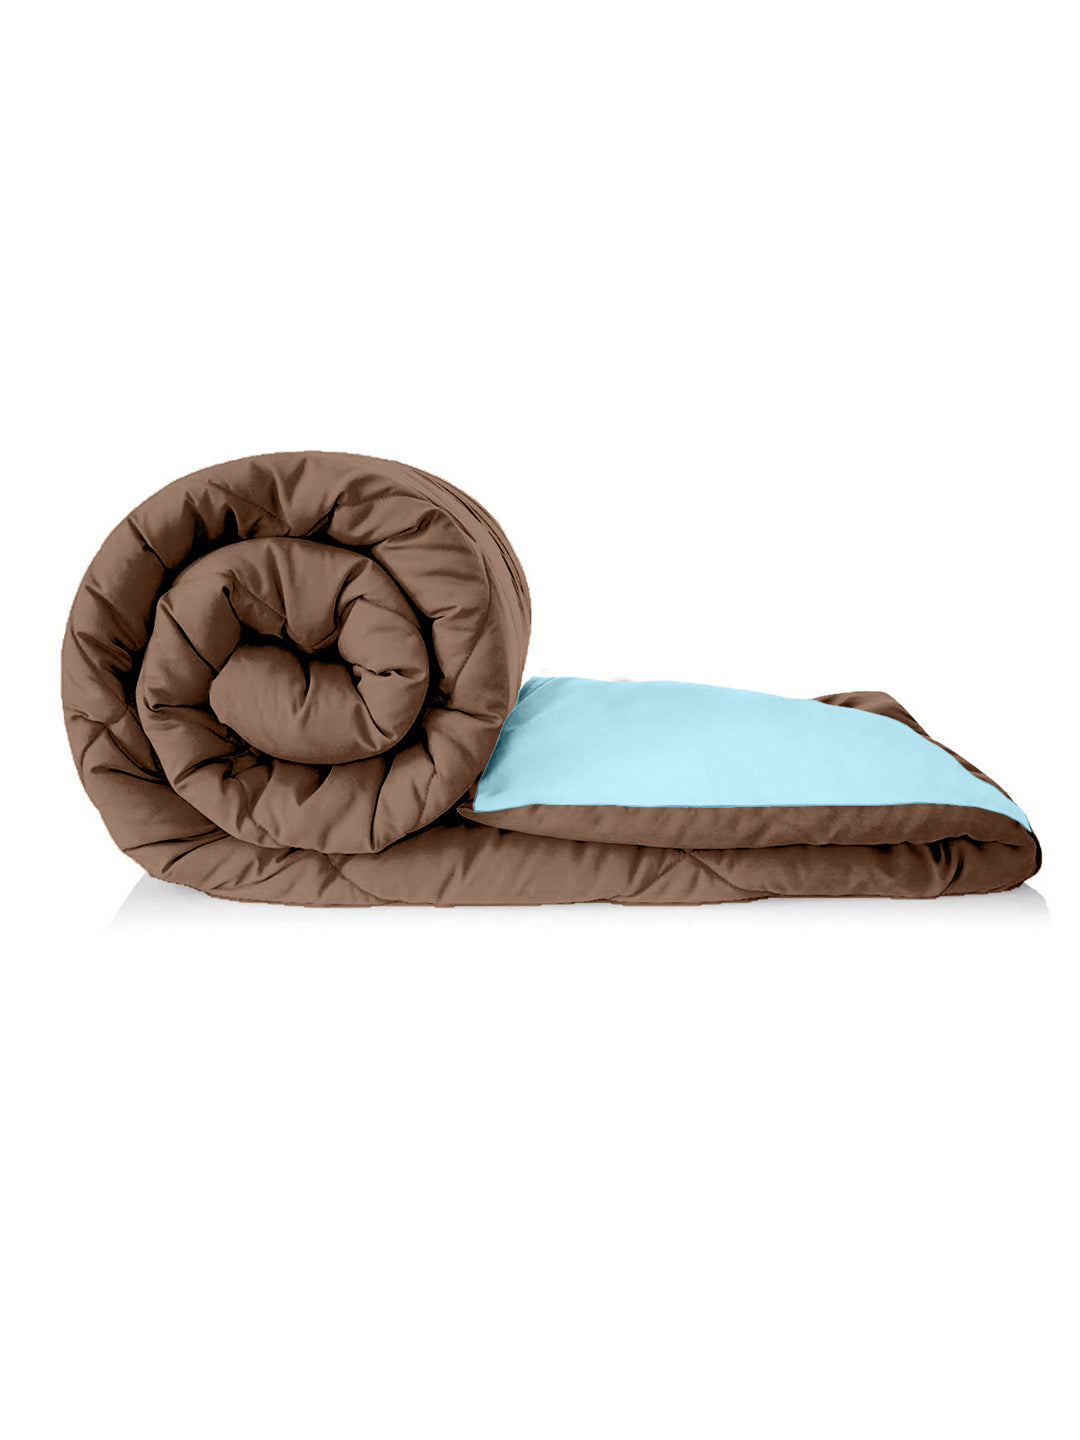 Reversible Single Bed Comforter 200 GSM 60x90 Inches (Aqua Blue & Brown)